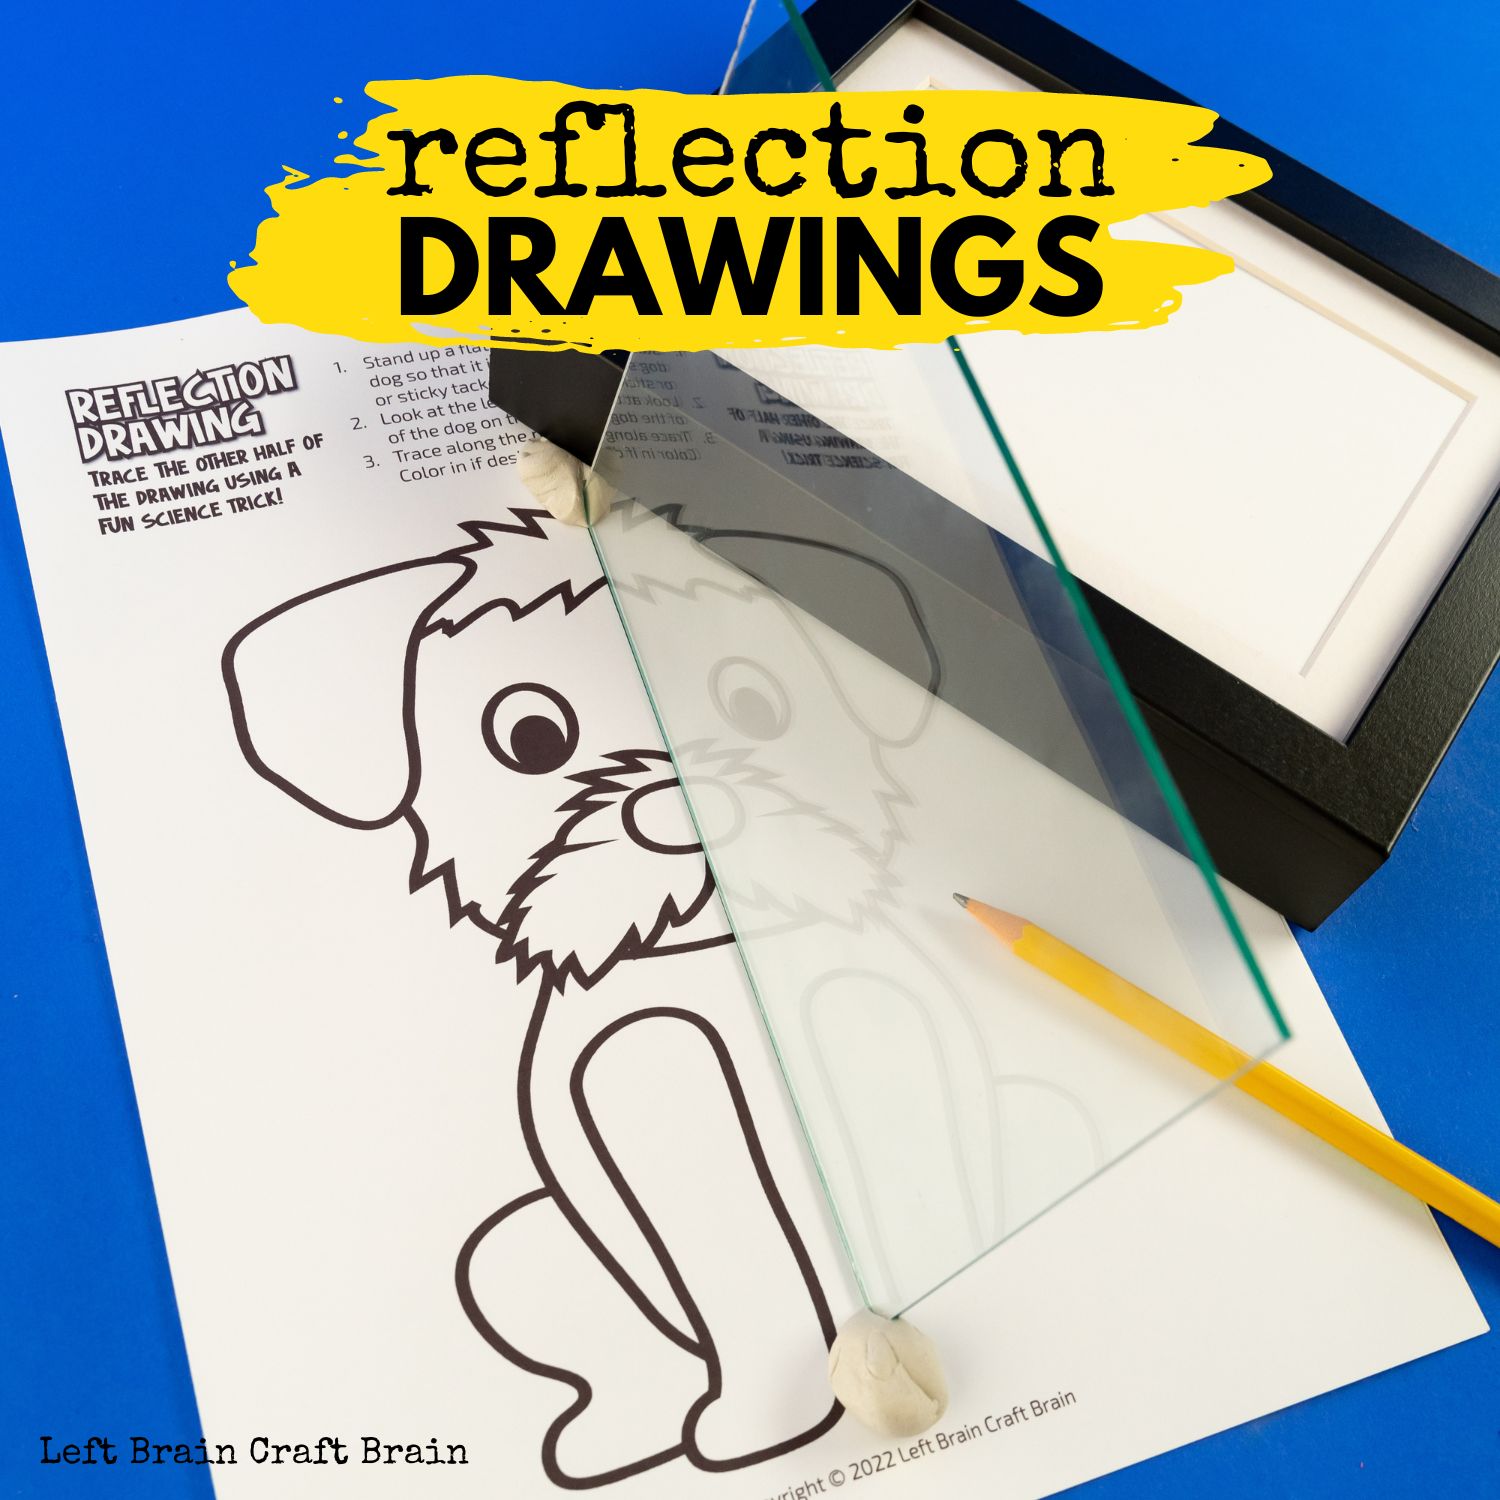 Reflection-Drawings-1500x1500-1